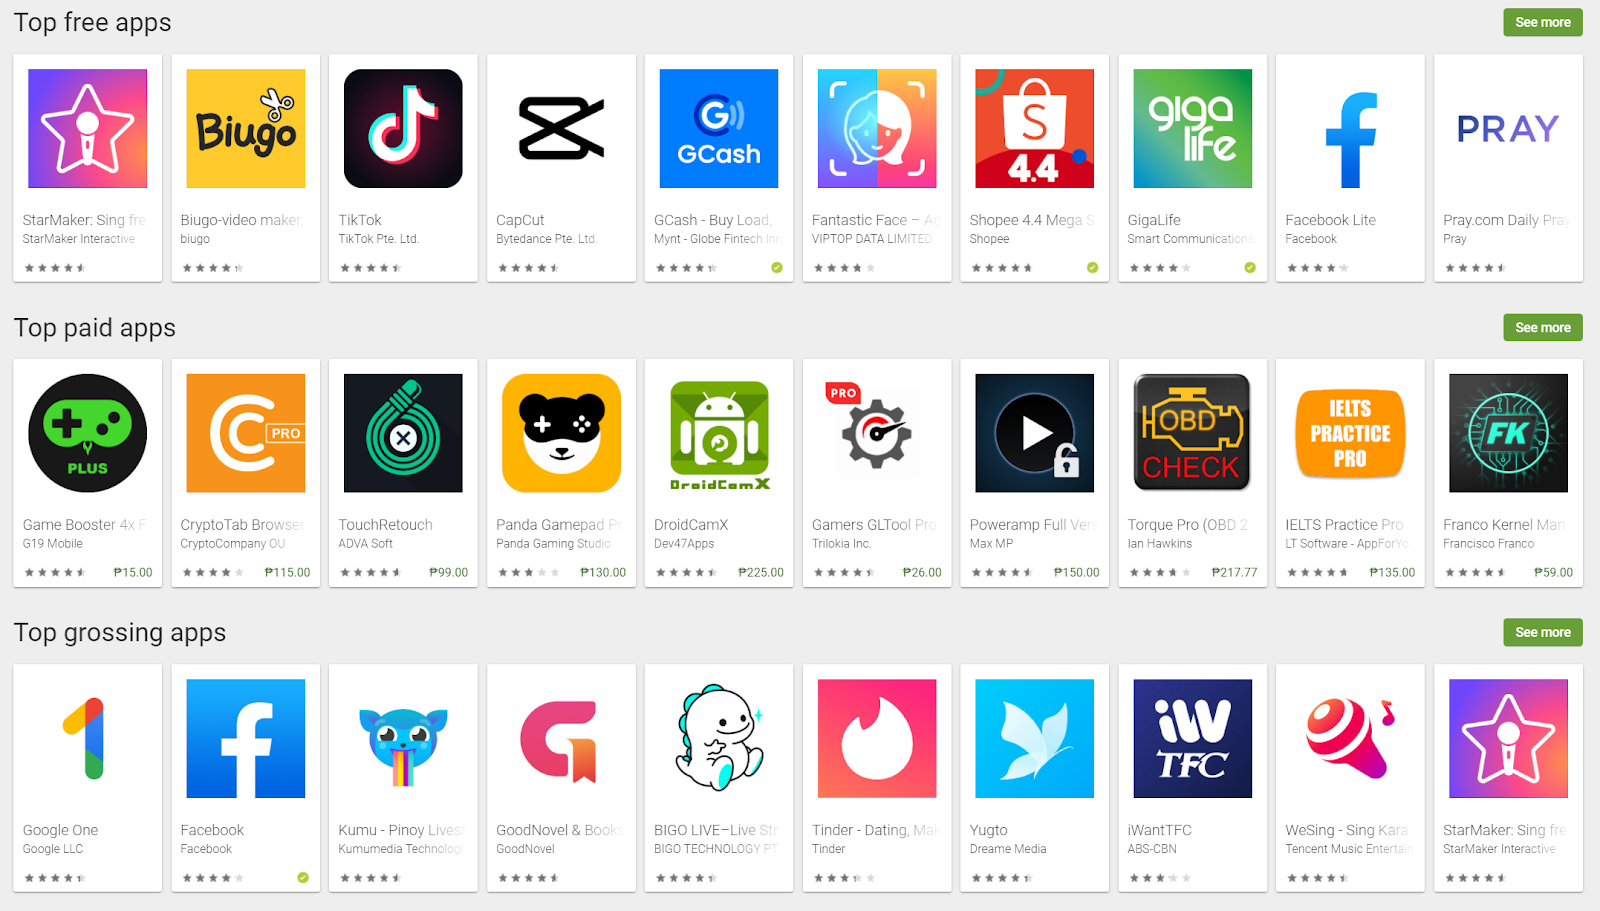 Screenshot of the featured apps in the Google Play Store.